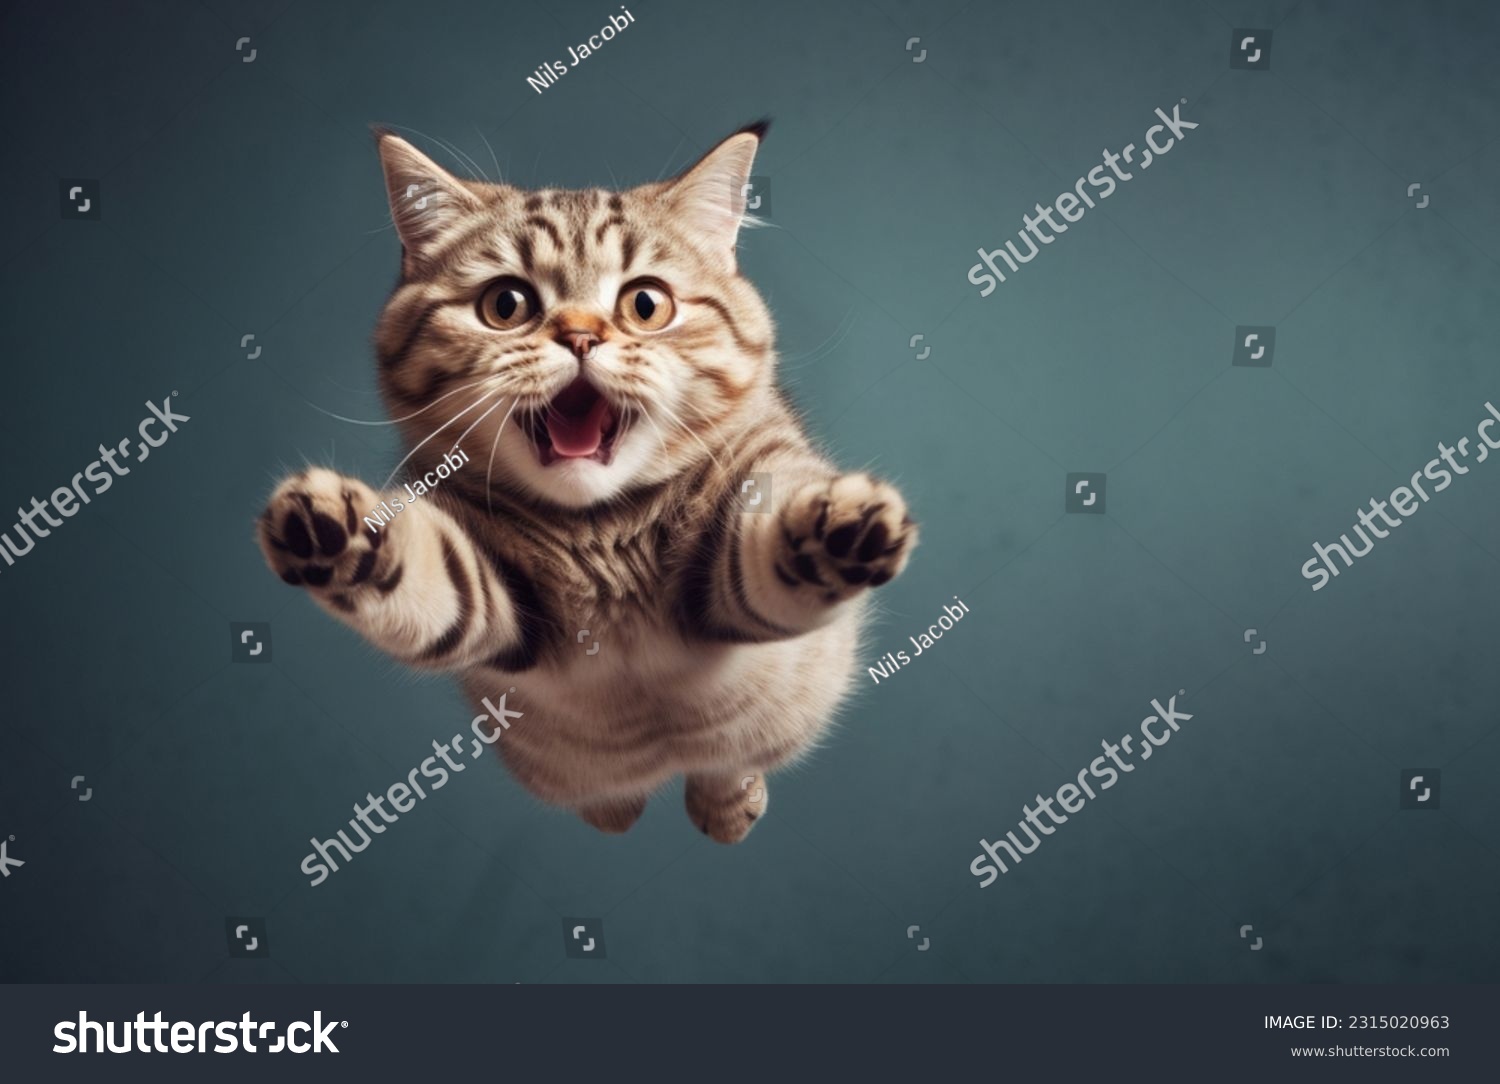 funny cat flying. photo of a playful tabby cat jumping mid-air looking at camera. background with copy space #2315020963